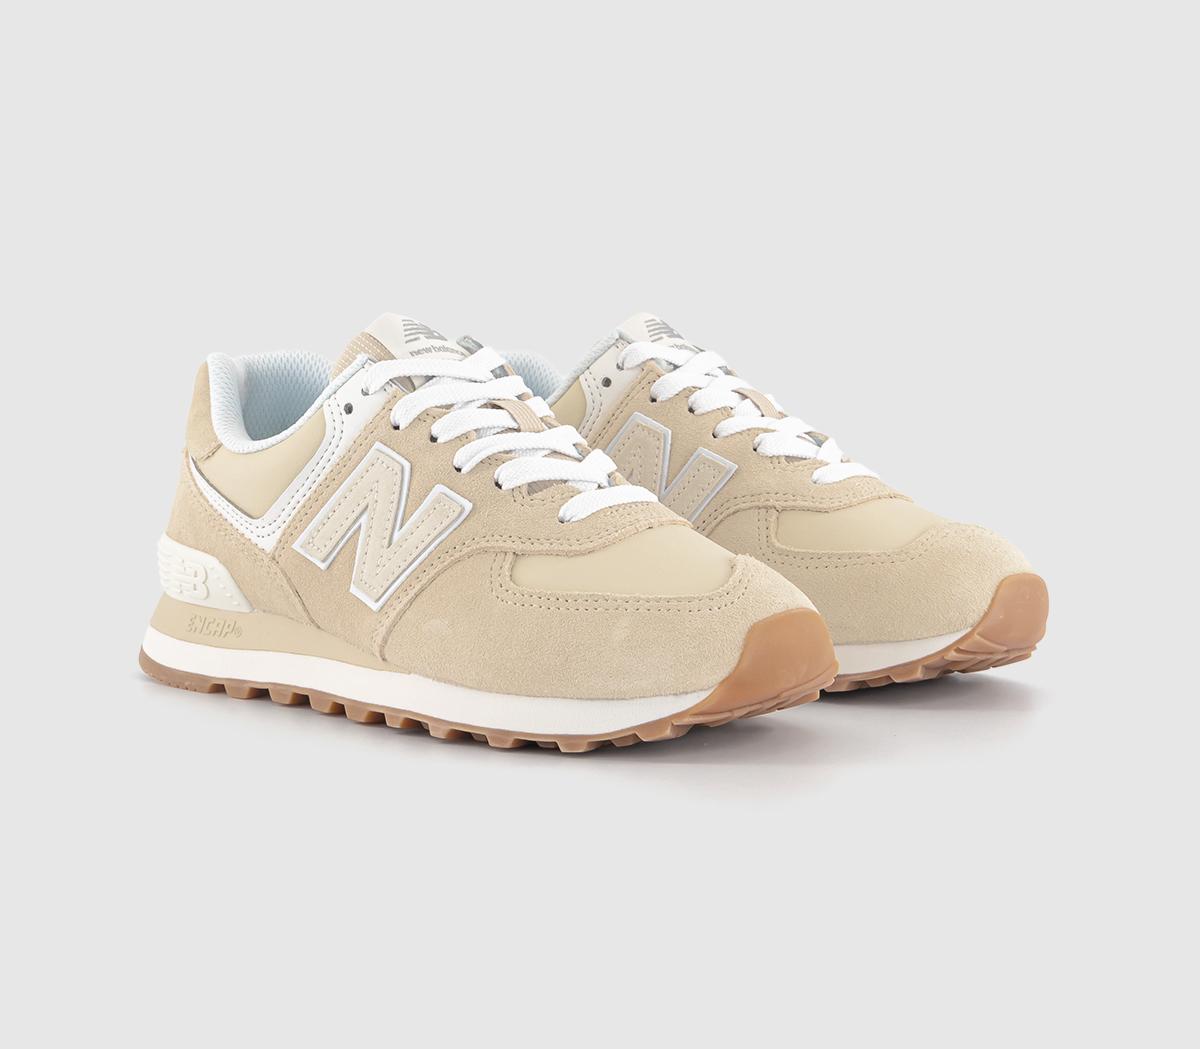 New Balance Womens 574 Trainers Sandstone Natural, 4.5